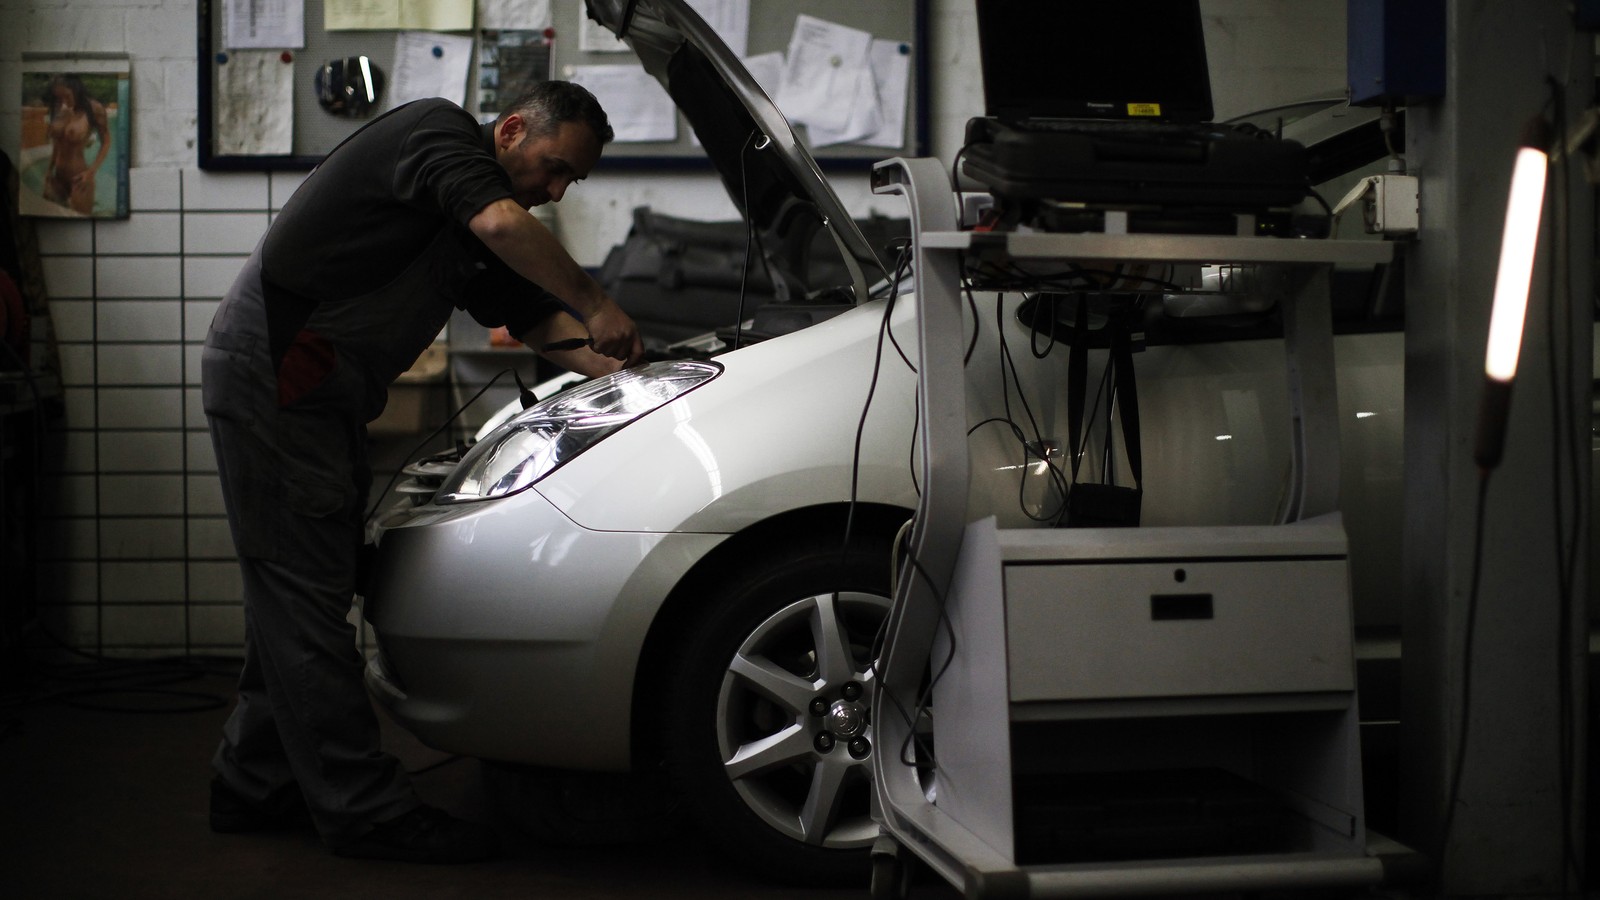 A Fight Over the Right to Repair Cars Takes a Wild Turn